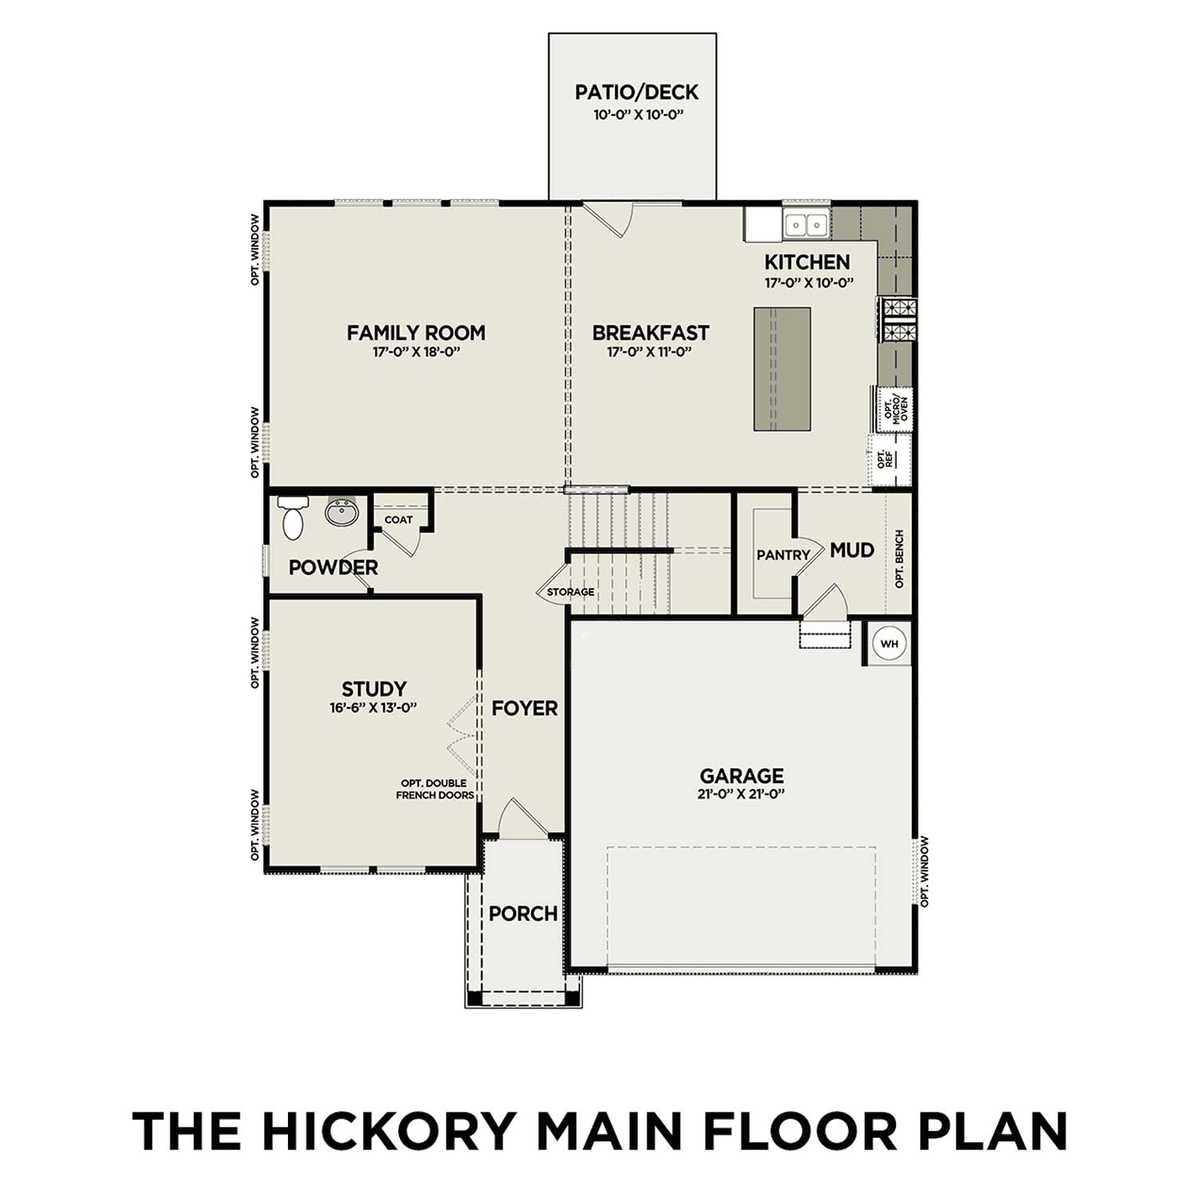 1 - The Hickory C floor plan layout for 446 Black Walnut Drive in Davidson Homes' Carellton community.